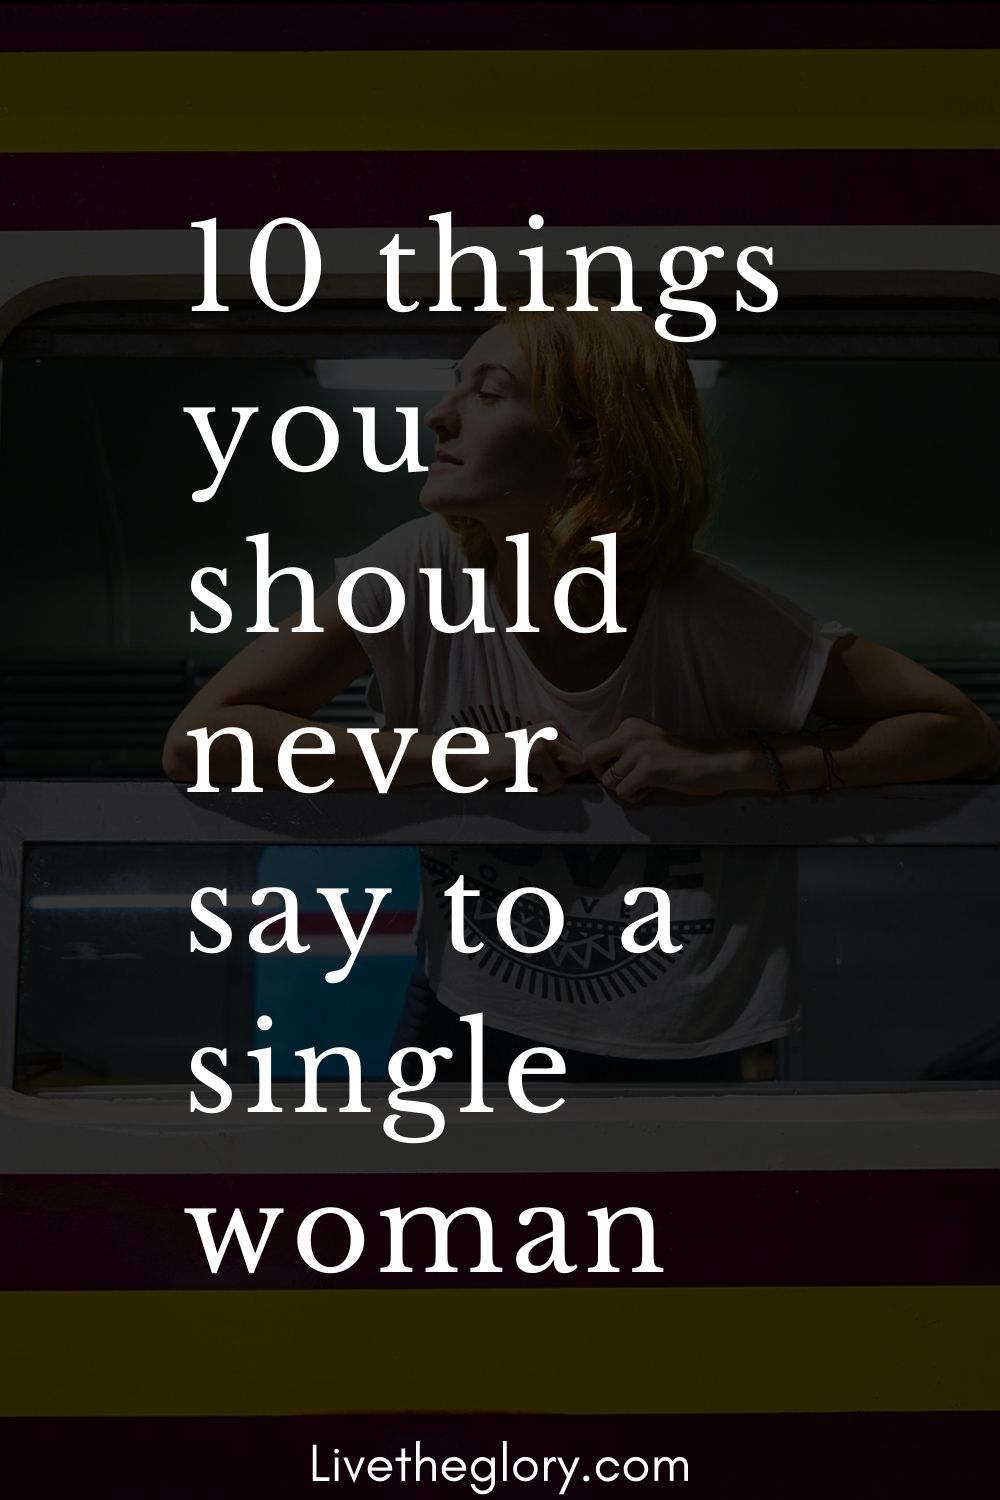 10 things you should never say to a single woman - Live the glory